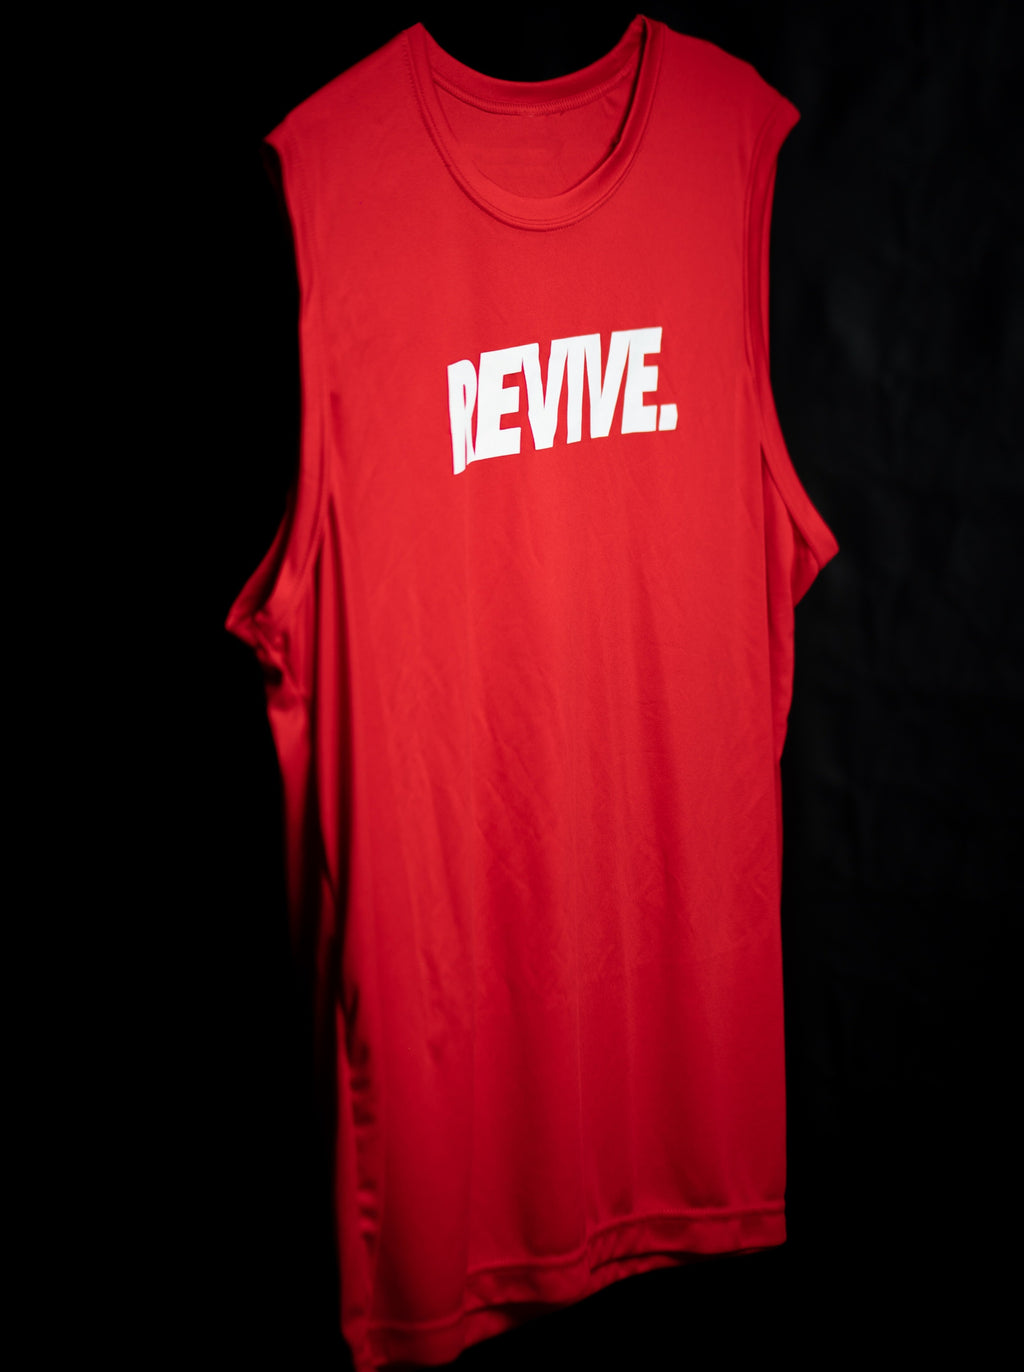 Revive Red Sleeveless Tee